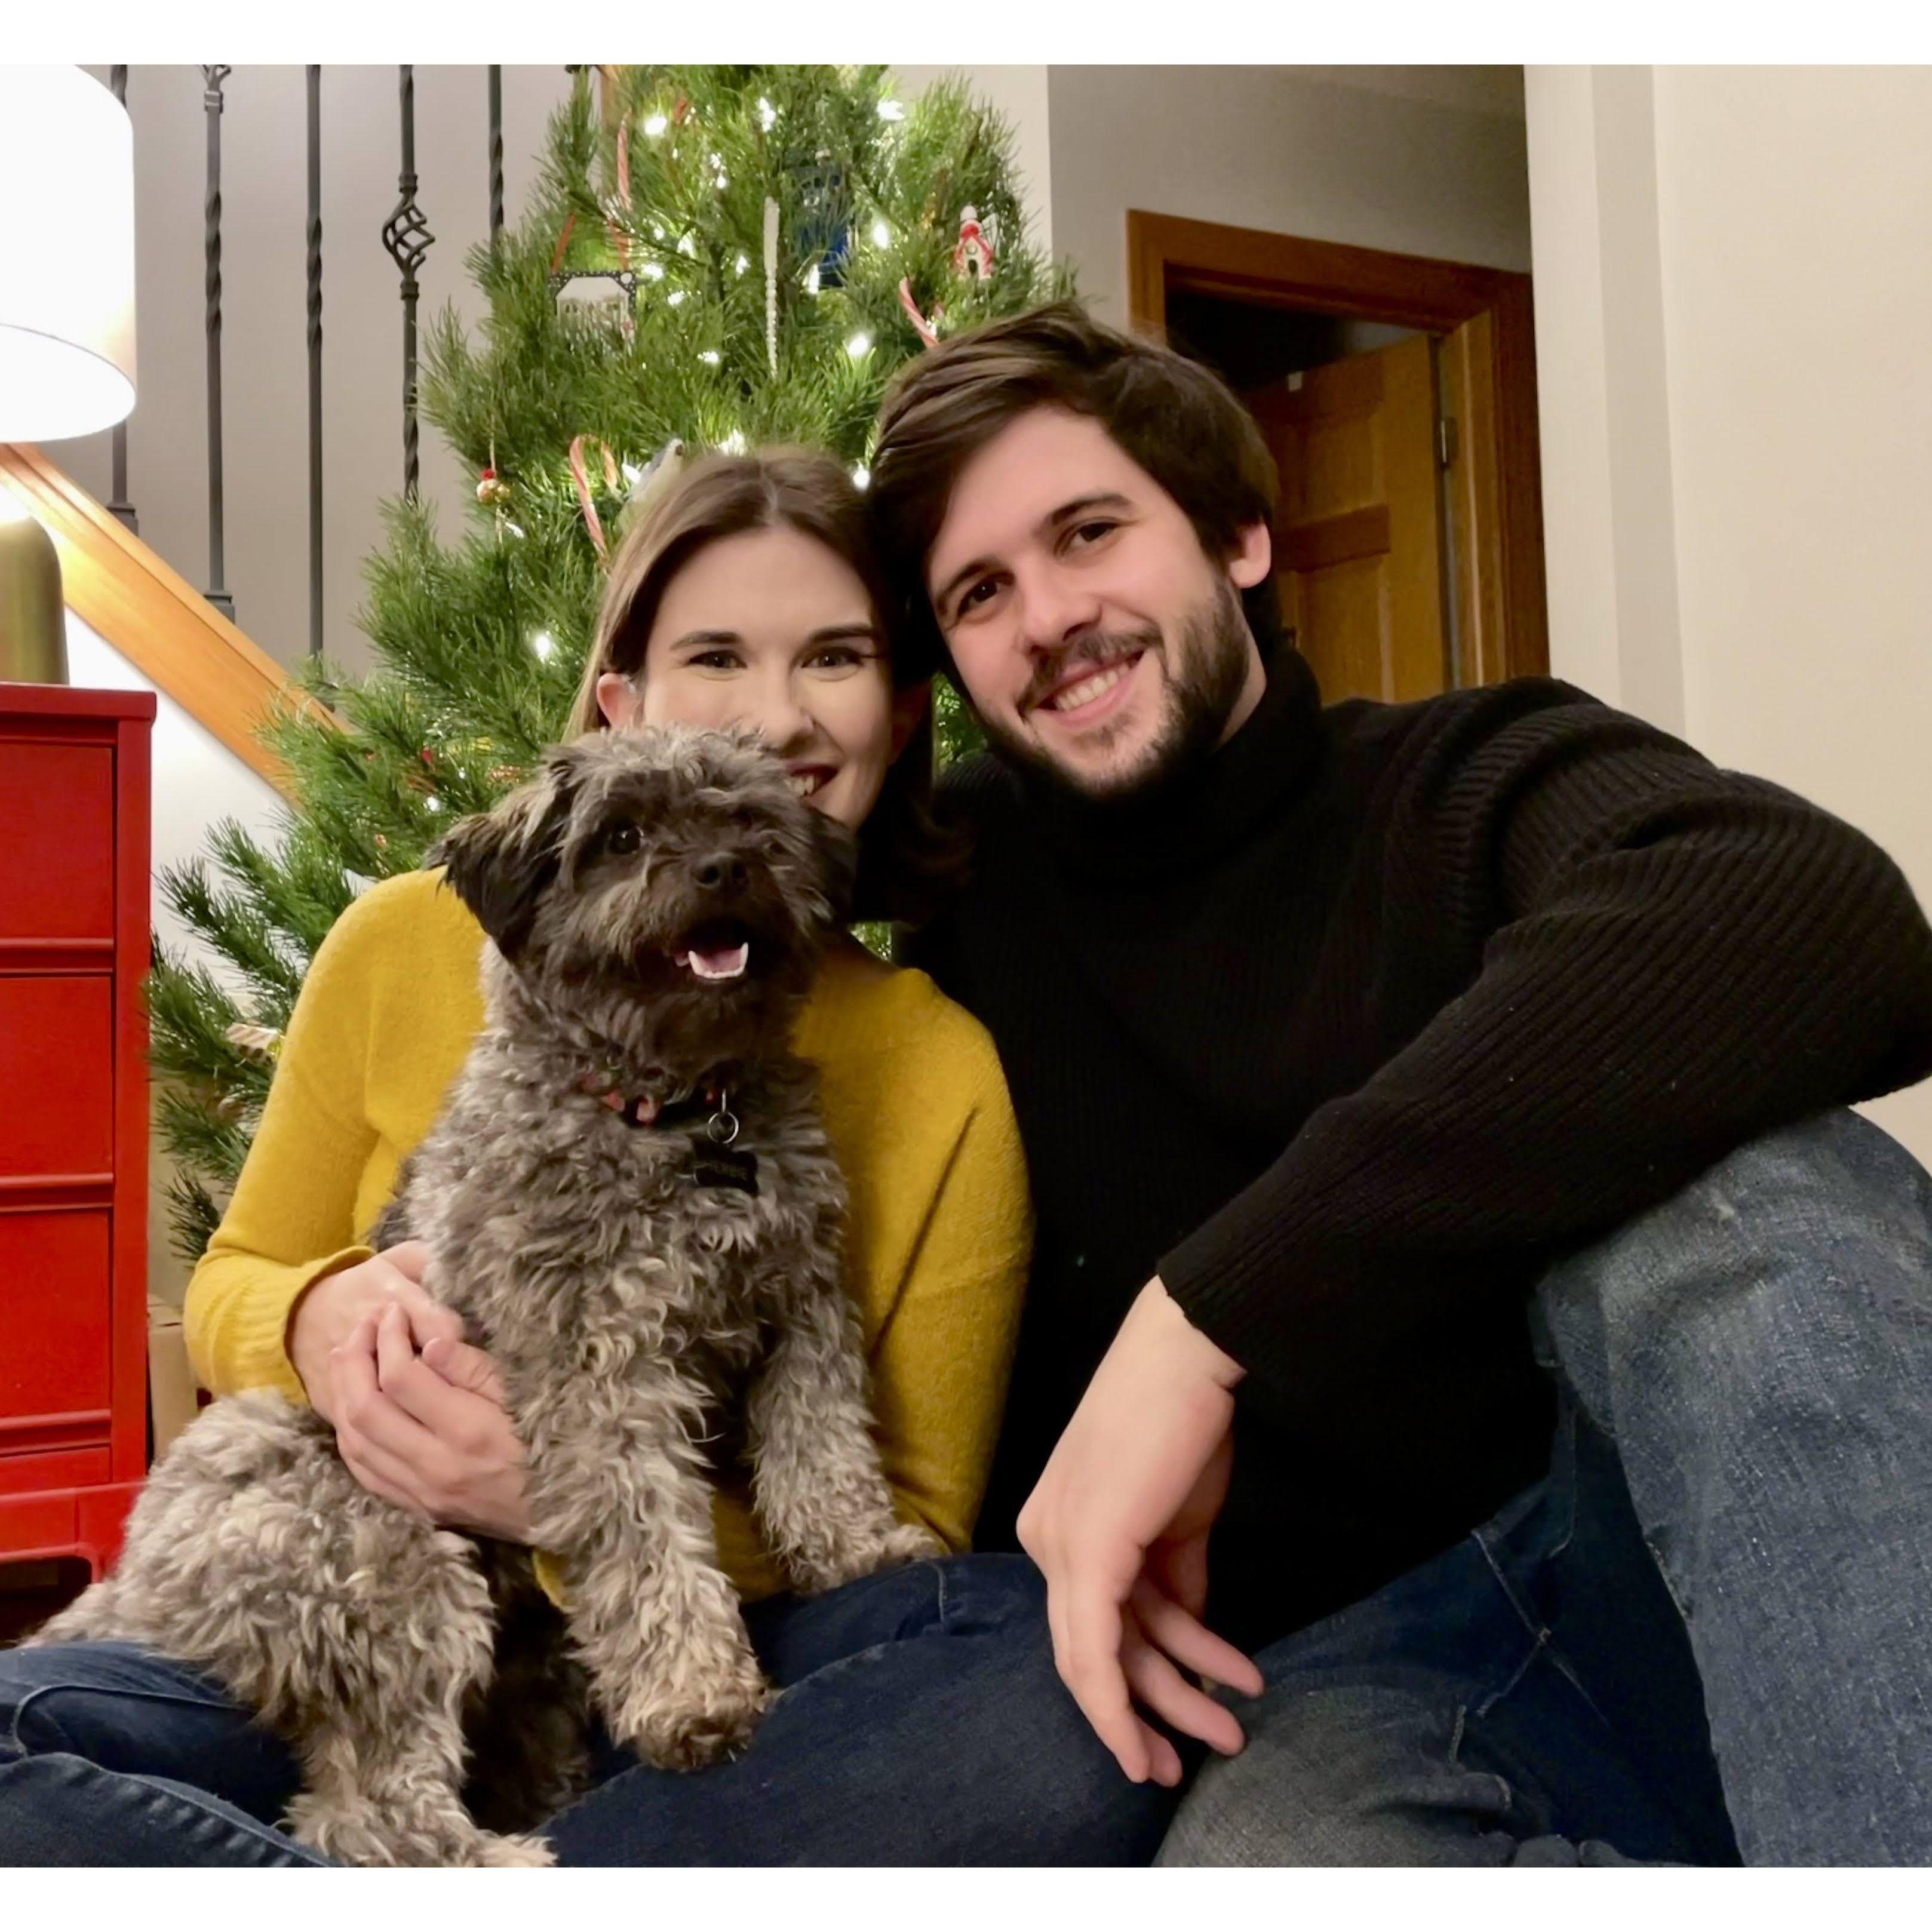 Christmas with our favorite furry friend.